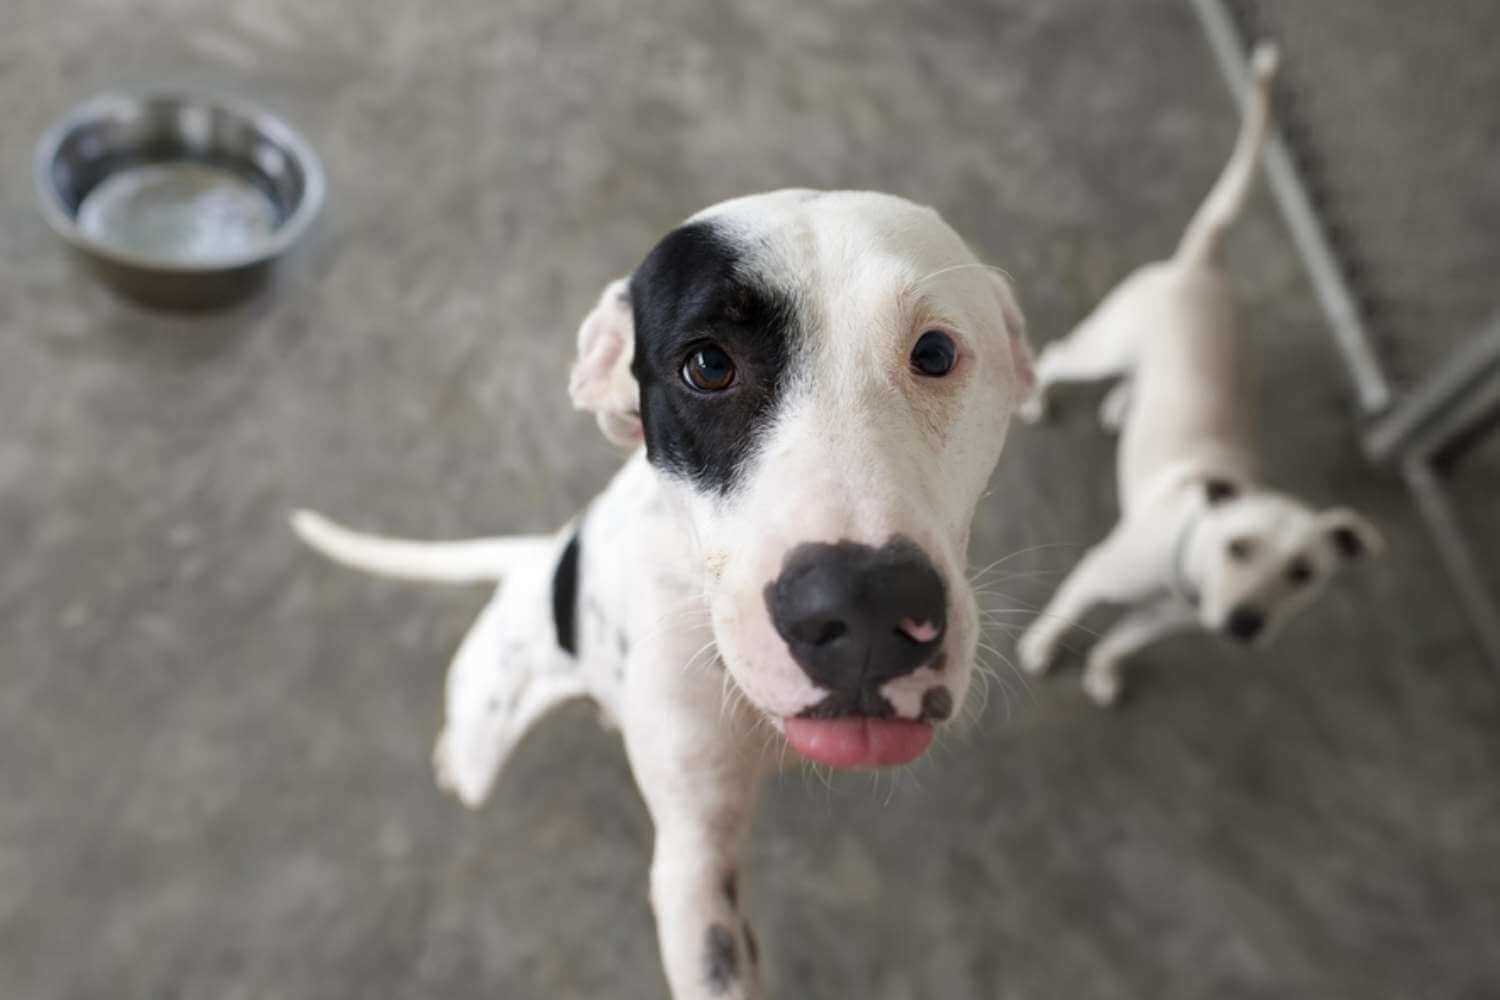 Columbus Adoptable Dog Being Silly